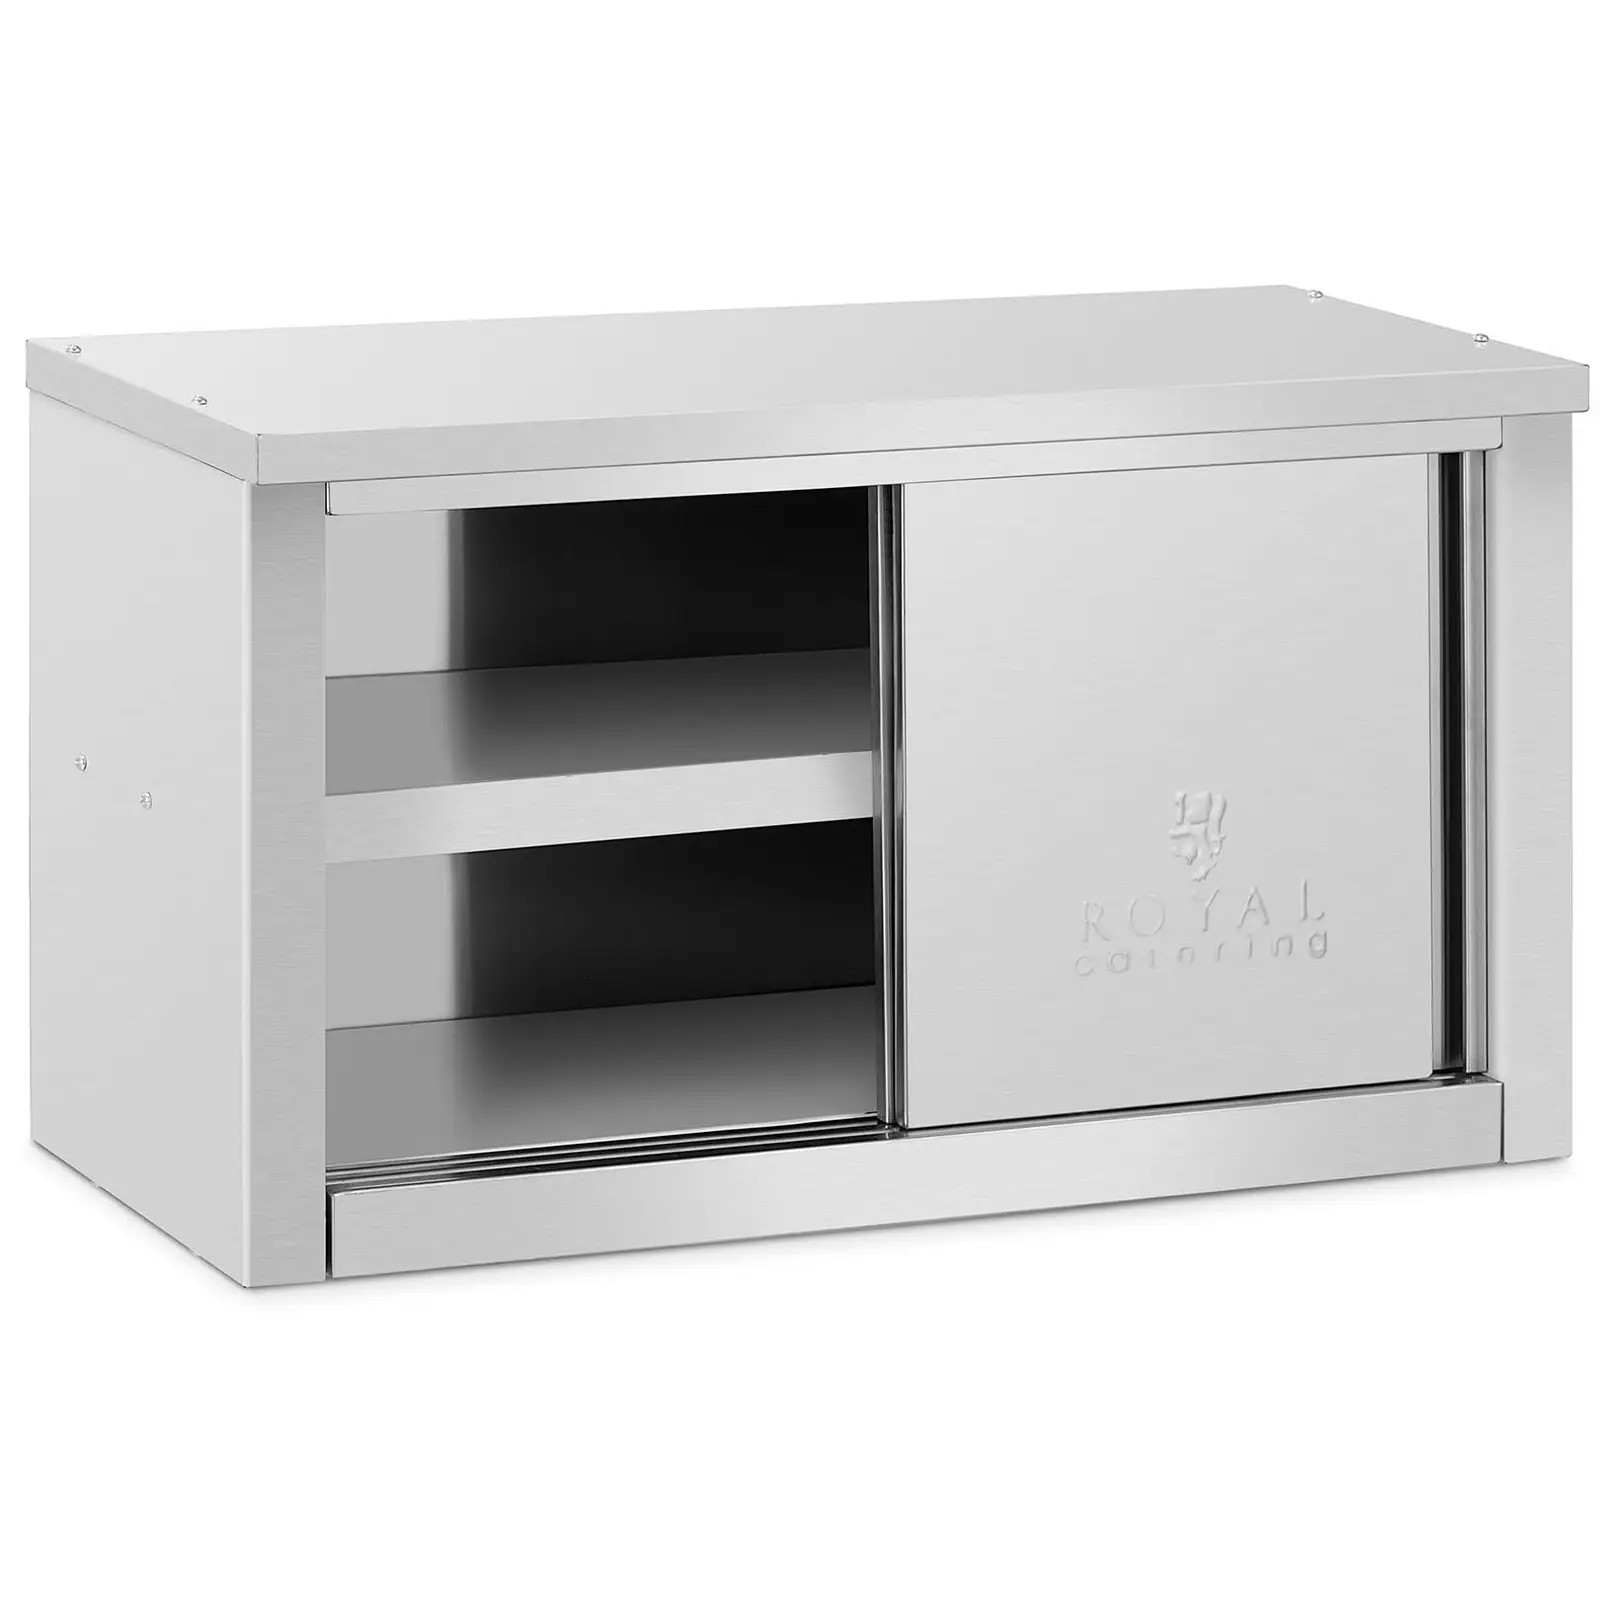 Hanging Cabinet - 900 x 400 x 500 mm - 70 kg load capacity per compartment - Royal Catering